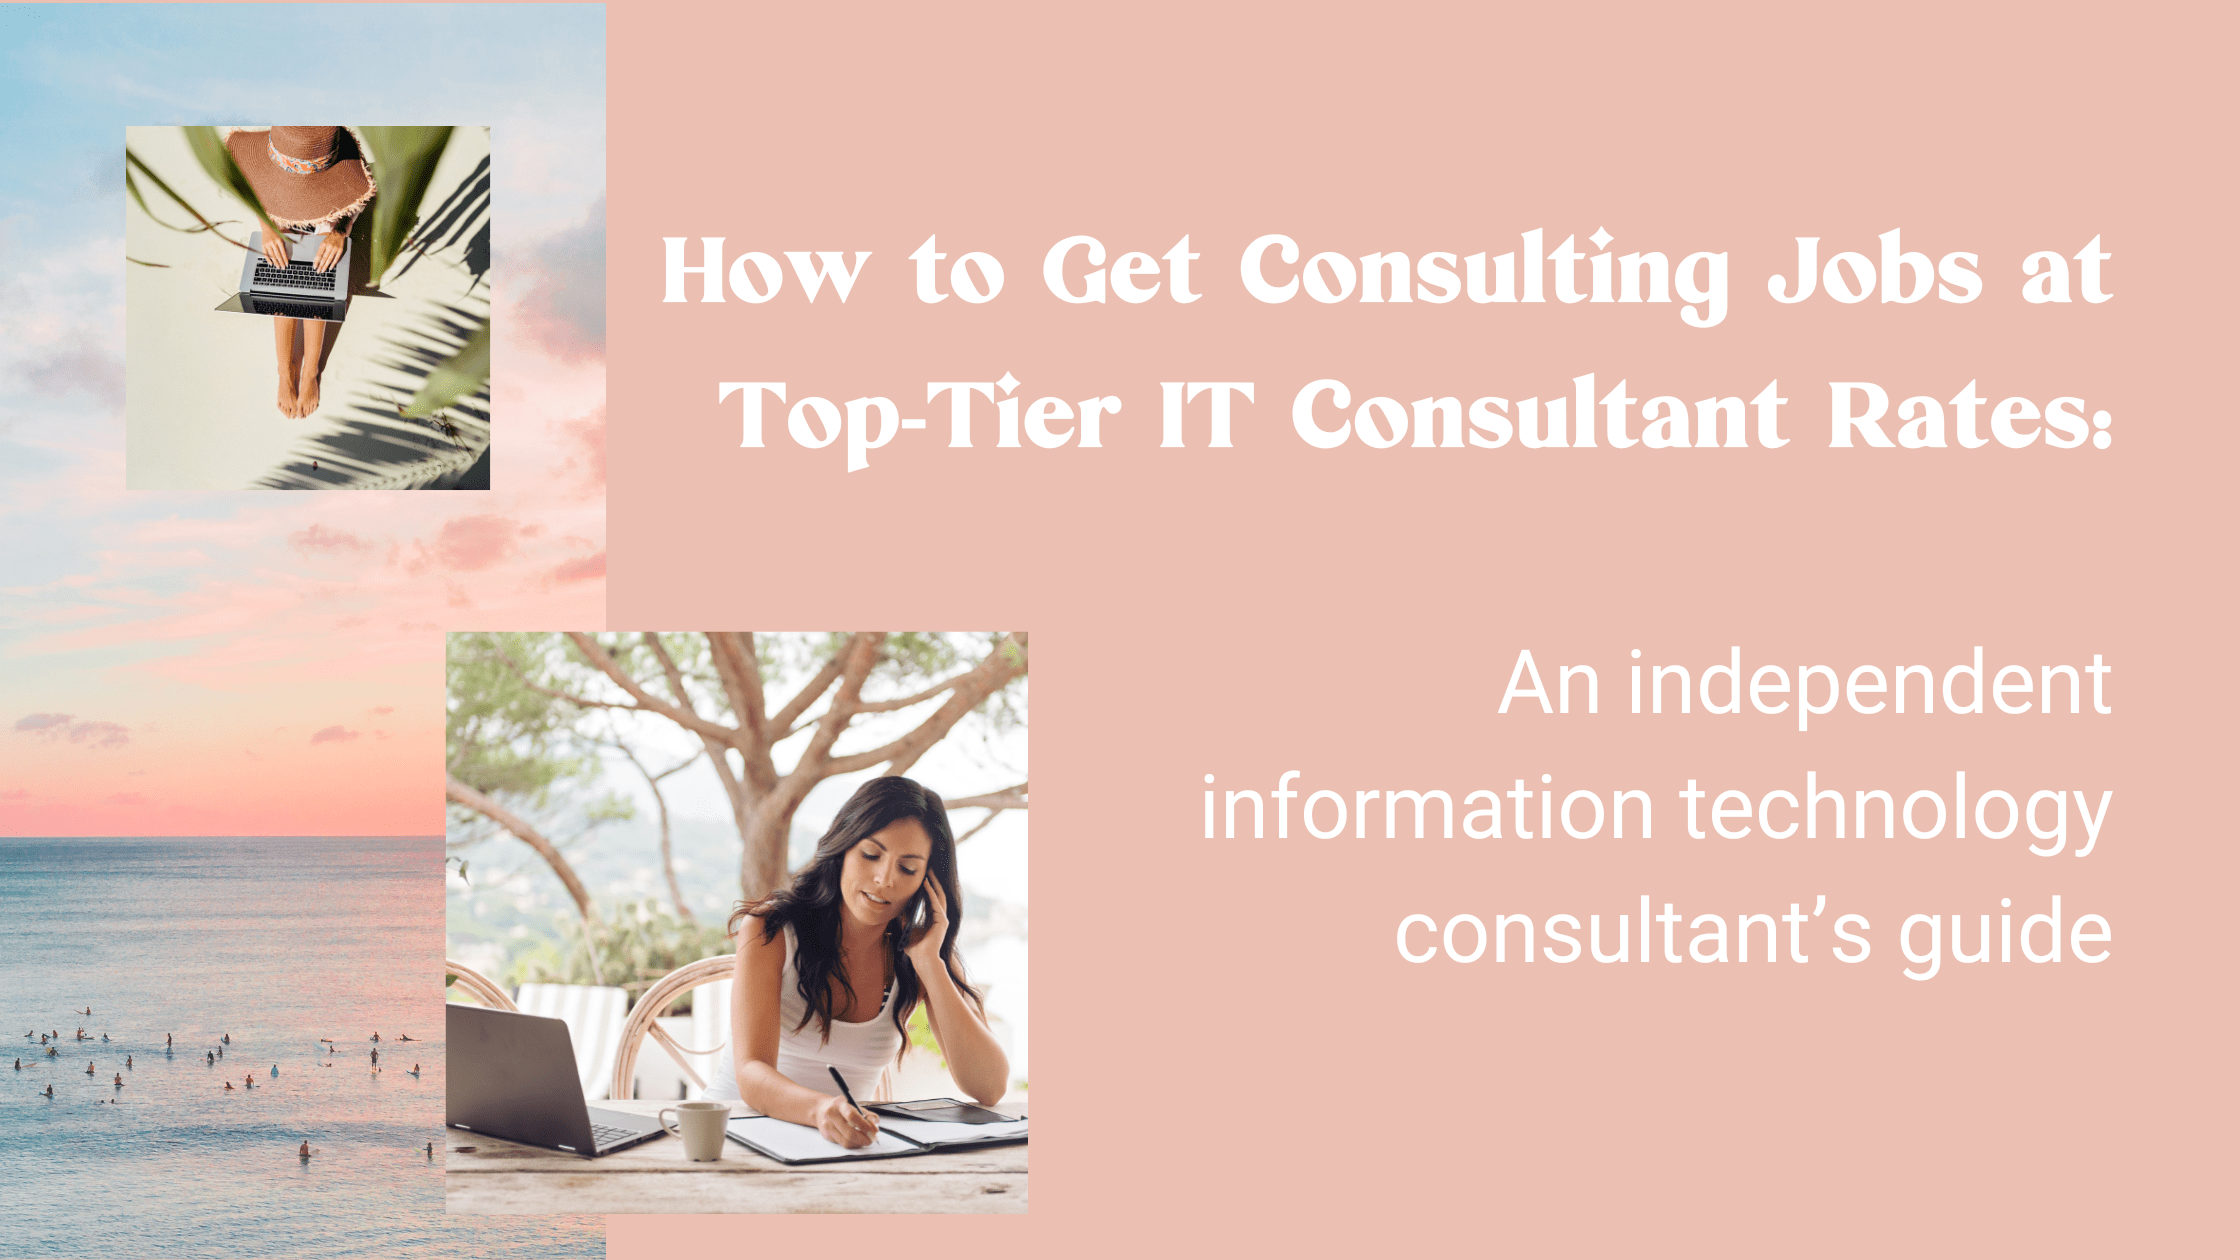 How to get consulting jobs at top-tier IT consultant rates